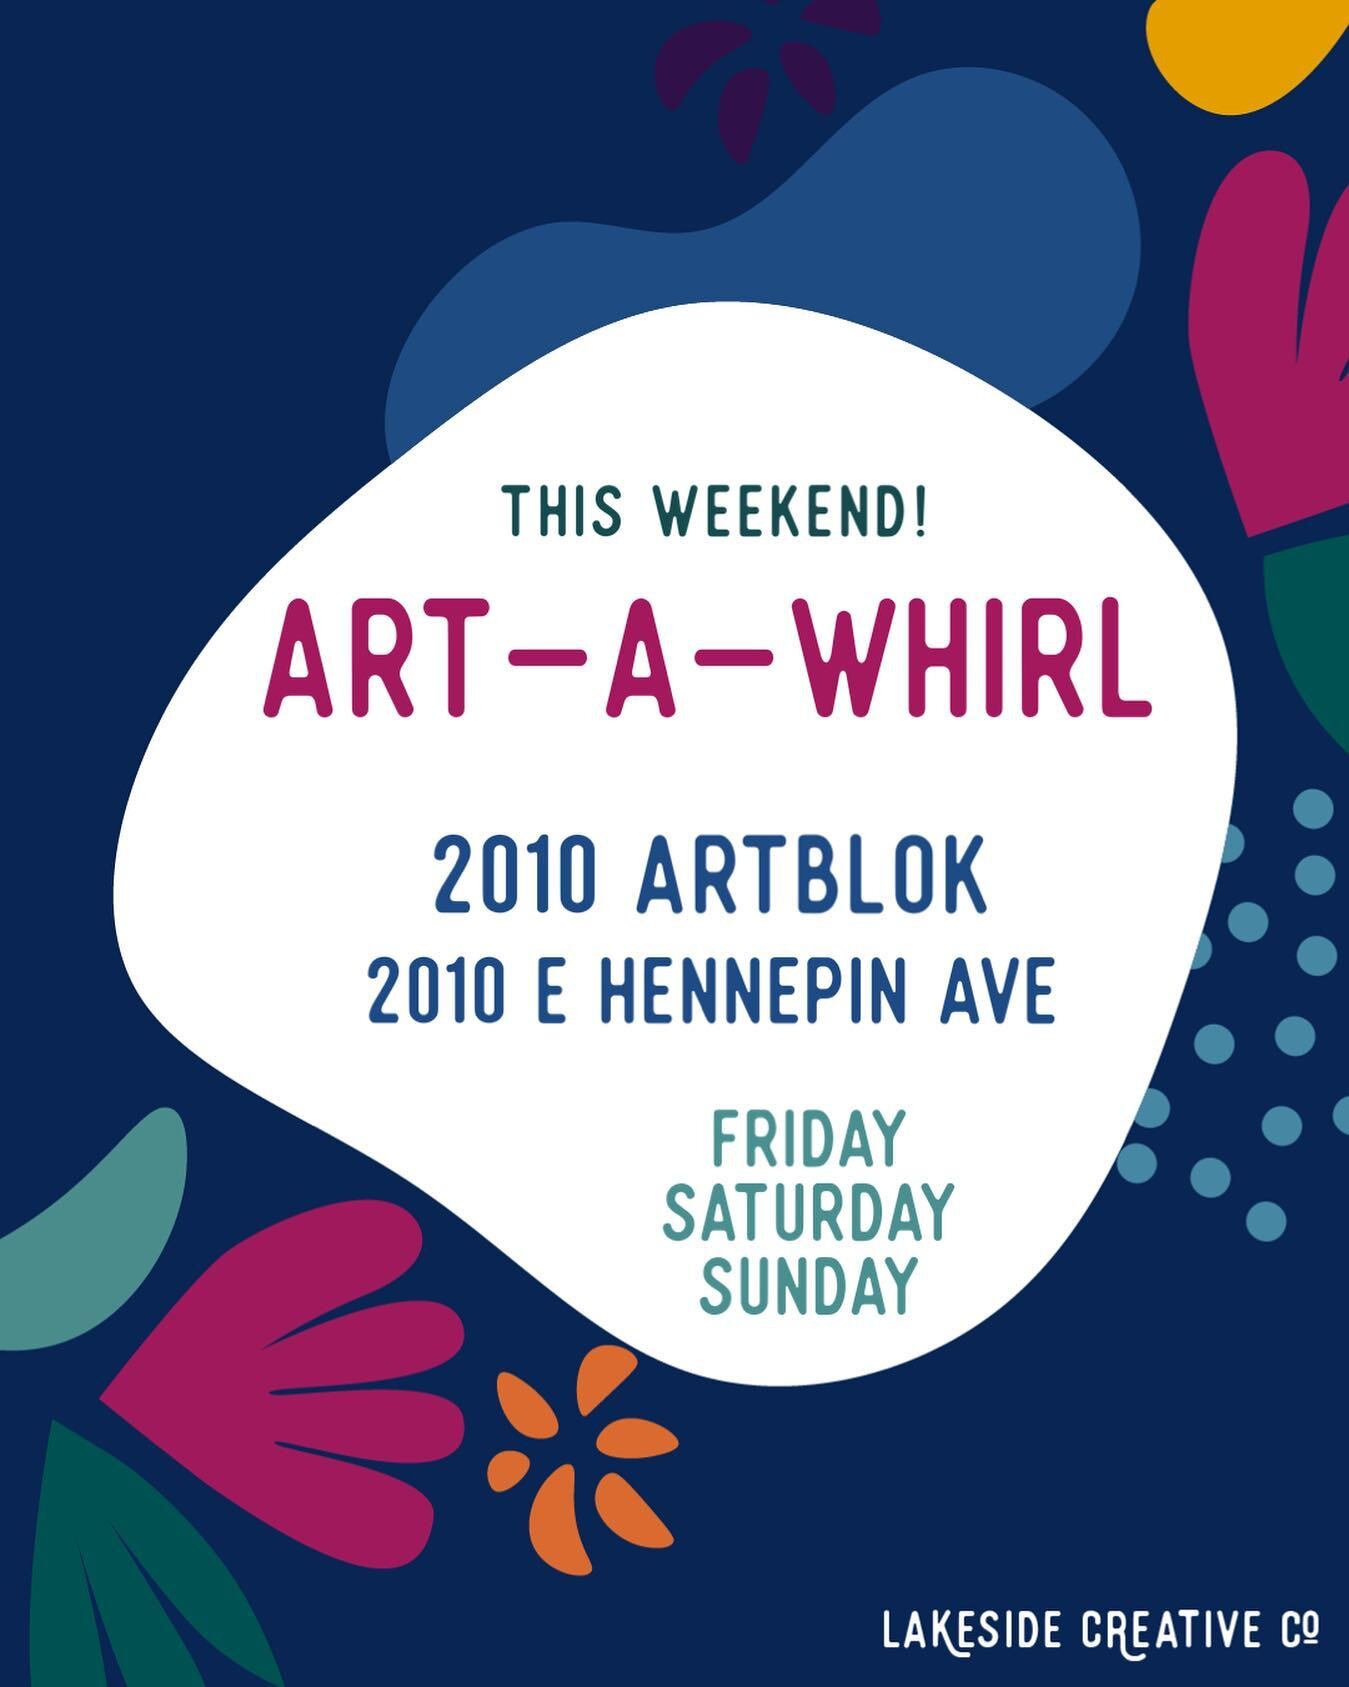 It&rsquo;s here! This weekend is Art-A-Whirl and I&rsquo;m participating for the first time. Eek! I&rsquo;ll be at @2010artblok all weekend with a whole bunch of earrings, small signs and shelf sitters guaranteed to brighten your day! 🤩